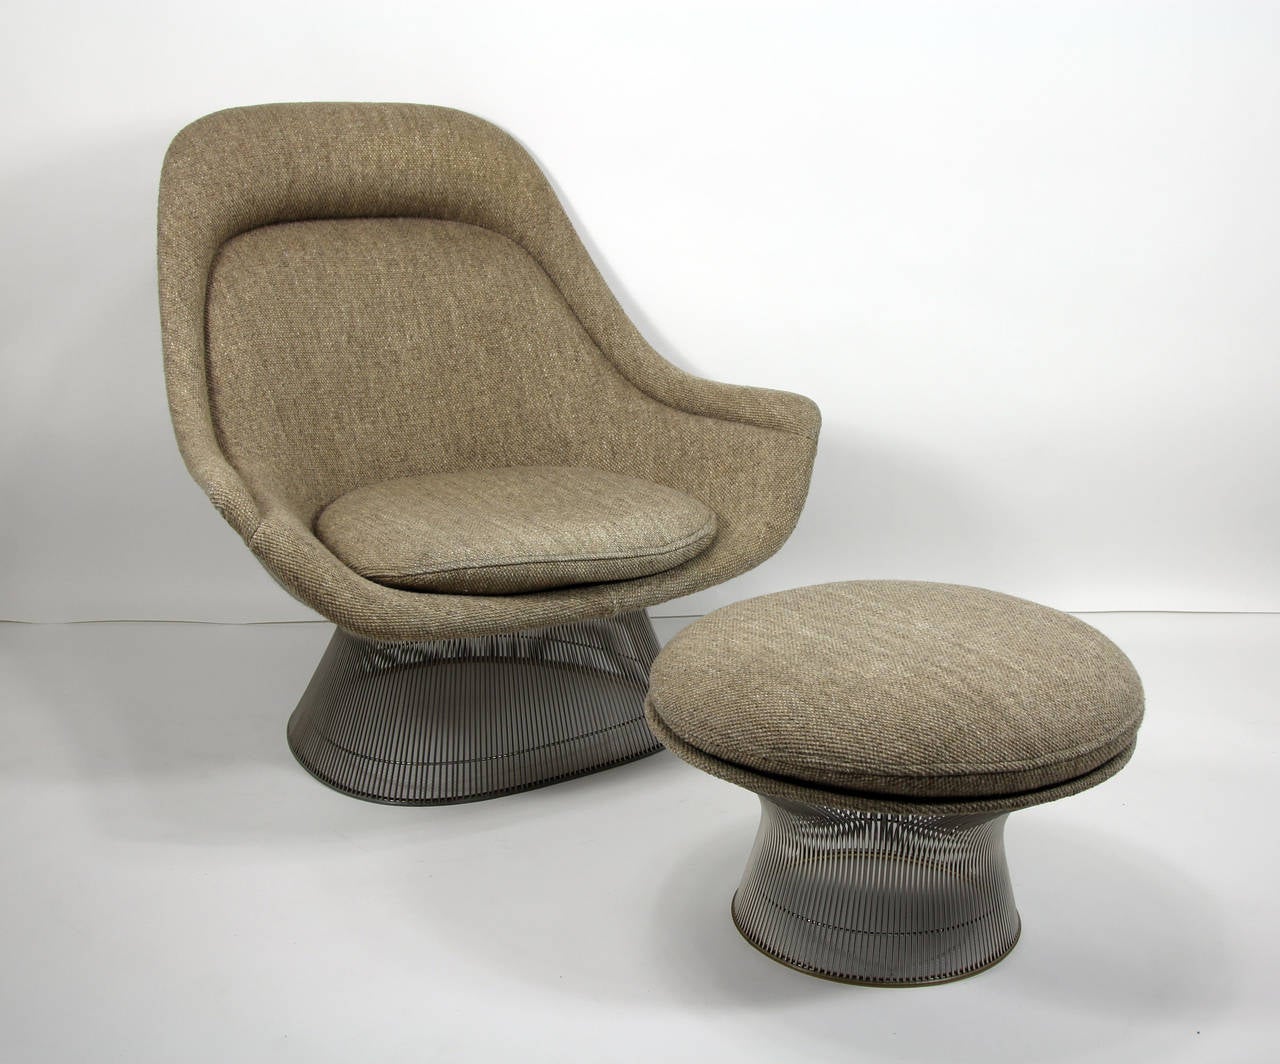 Very unique an iconic original Knoll easy chair and ottoman designed by Warren Platner. Incredible style and comfort. Rare to find such an incredible chair in original fabric in next to perfect condition.